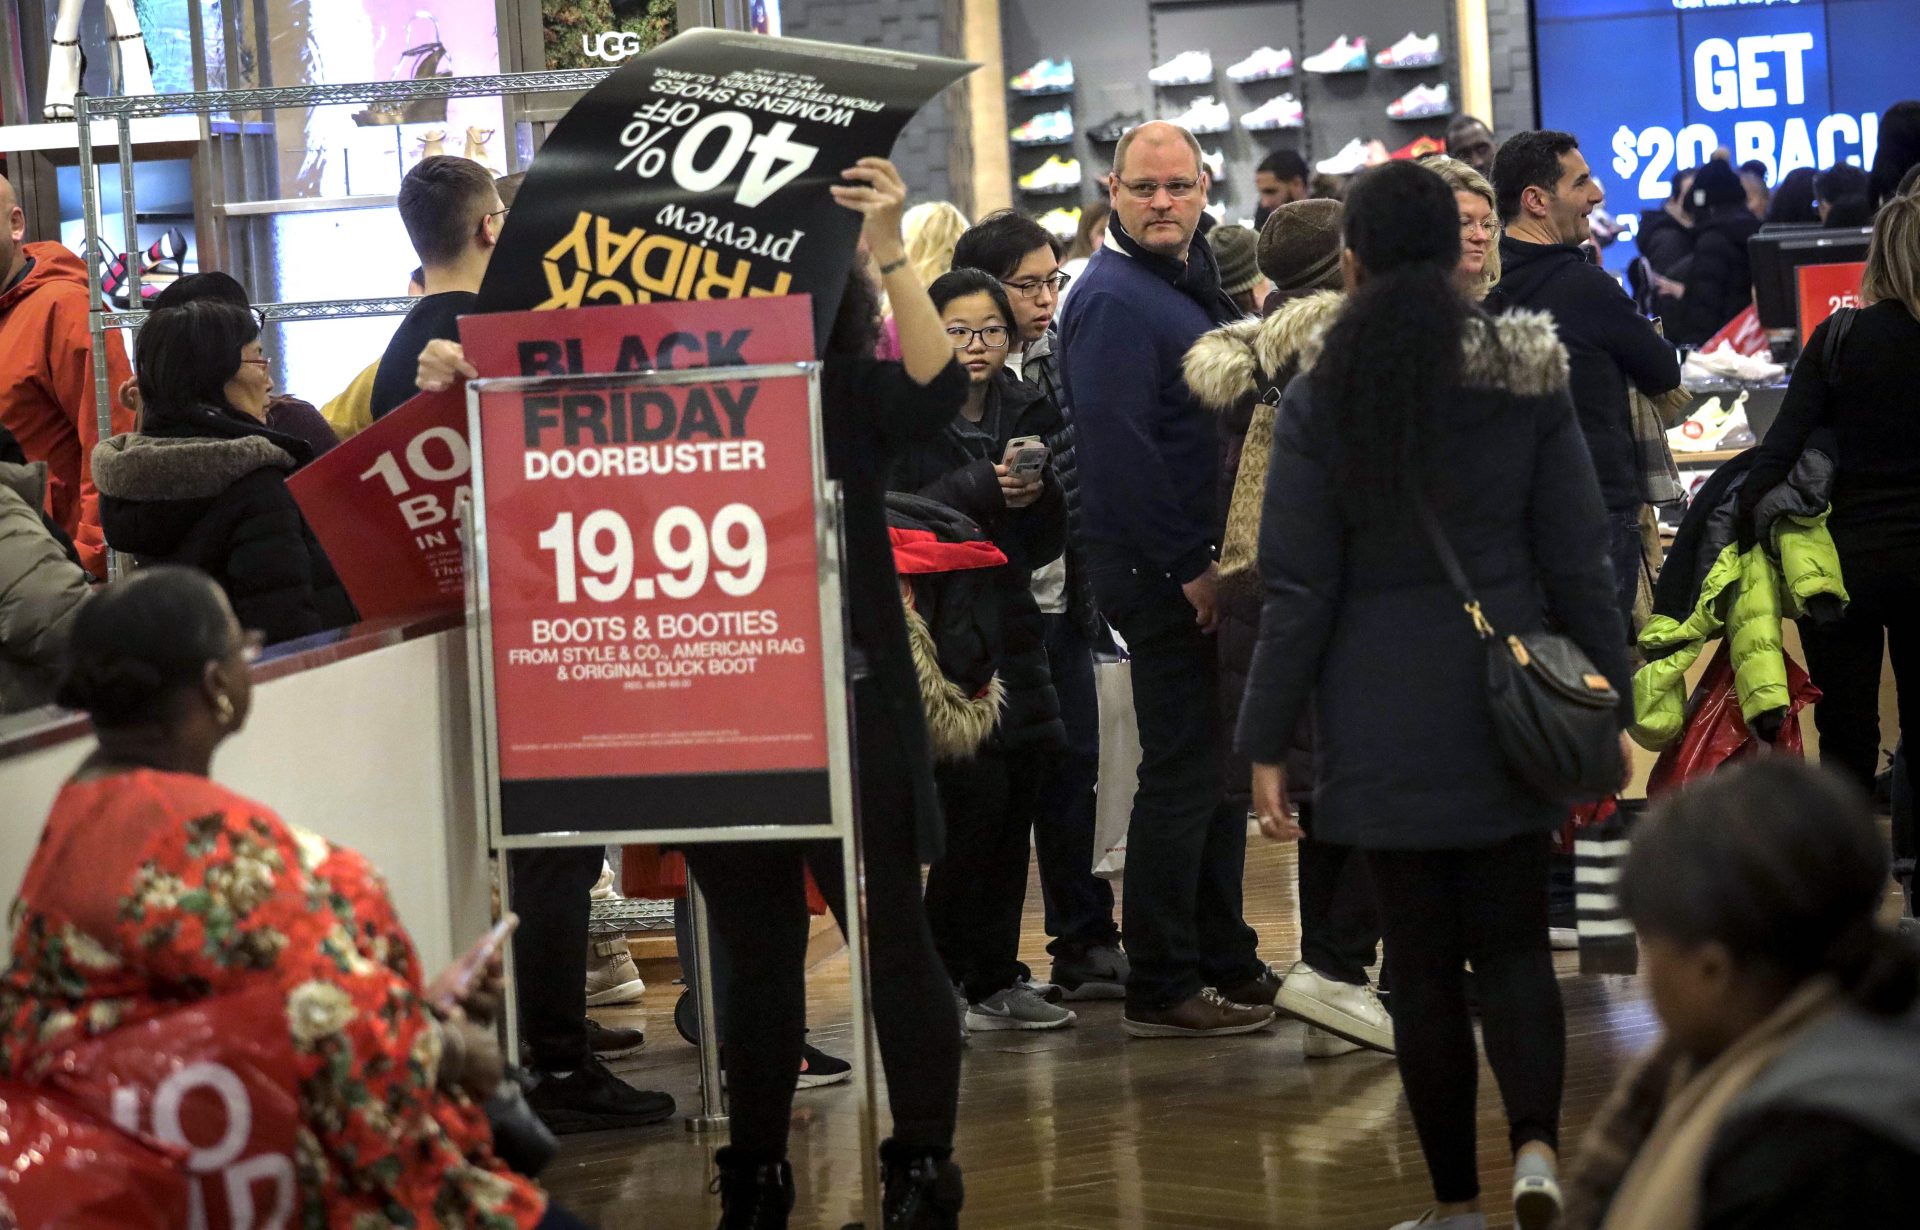 An employee posts discount signs for shoppers at Macy's department store during Black Friday shopping, Friday Nov. 29, 2019, in New York. Black Friday shoppers fought for parking spots and traveled cross-state to their favorite malls, kicking off a shortened shopping season that intensified the mad scramble between Thanksgiving and Christmas.